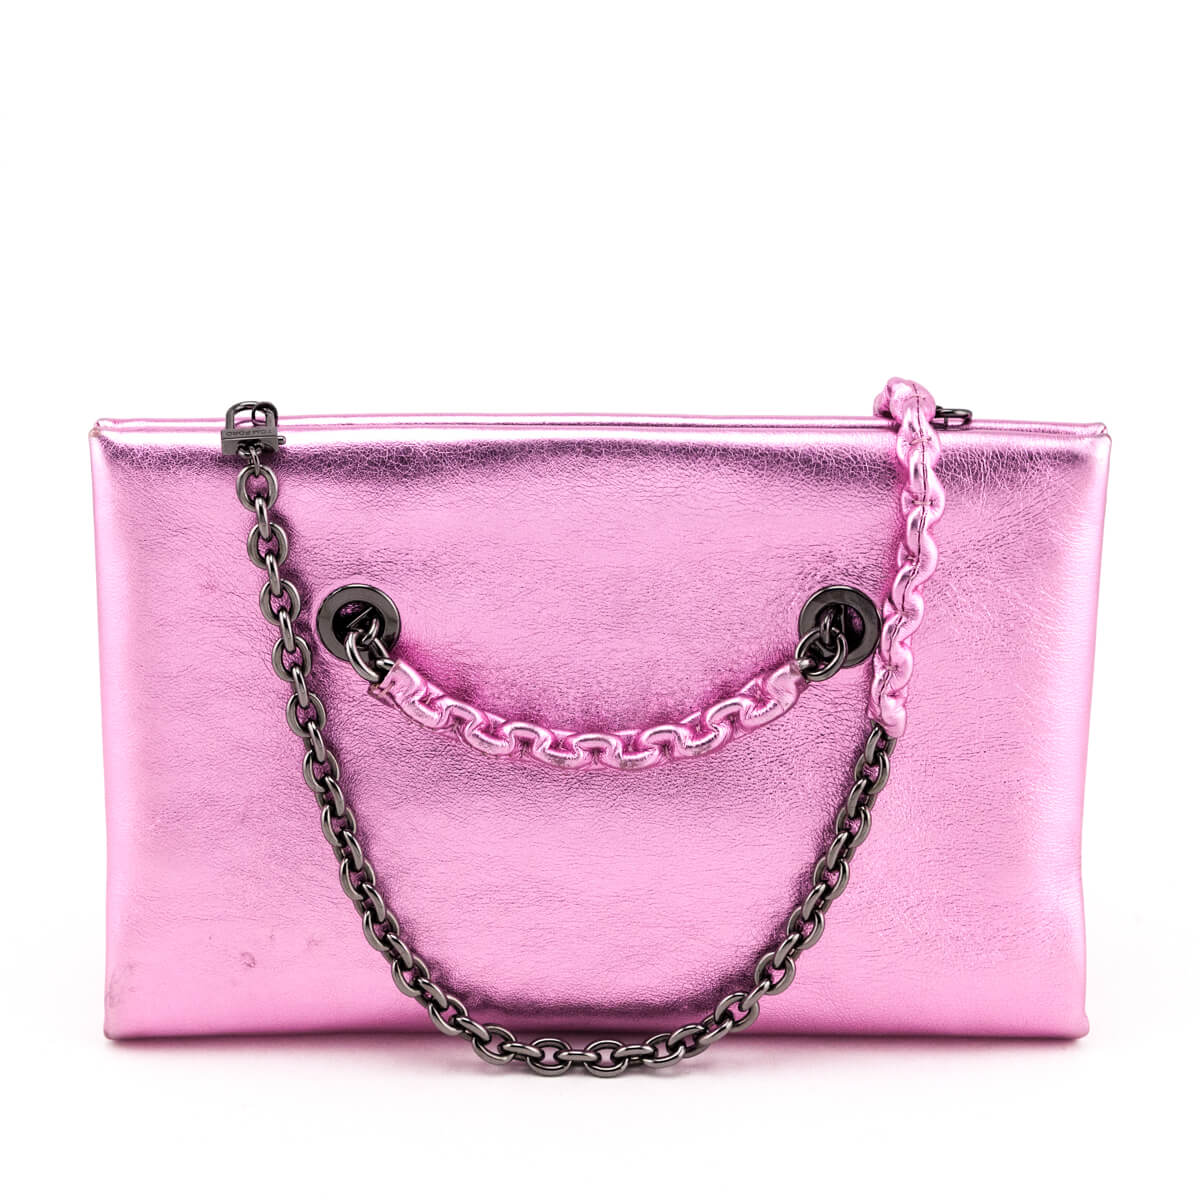 Tom Ford Metallic Pink Chain Convertible Clutch - Love that Bag etc - Preowned Authentic Designer Handbags & Preloved Fashions